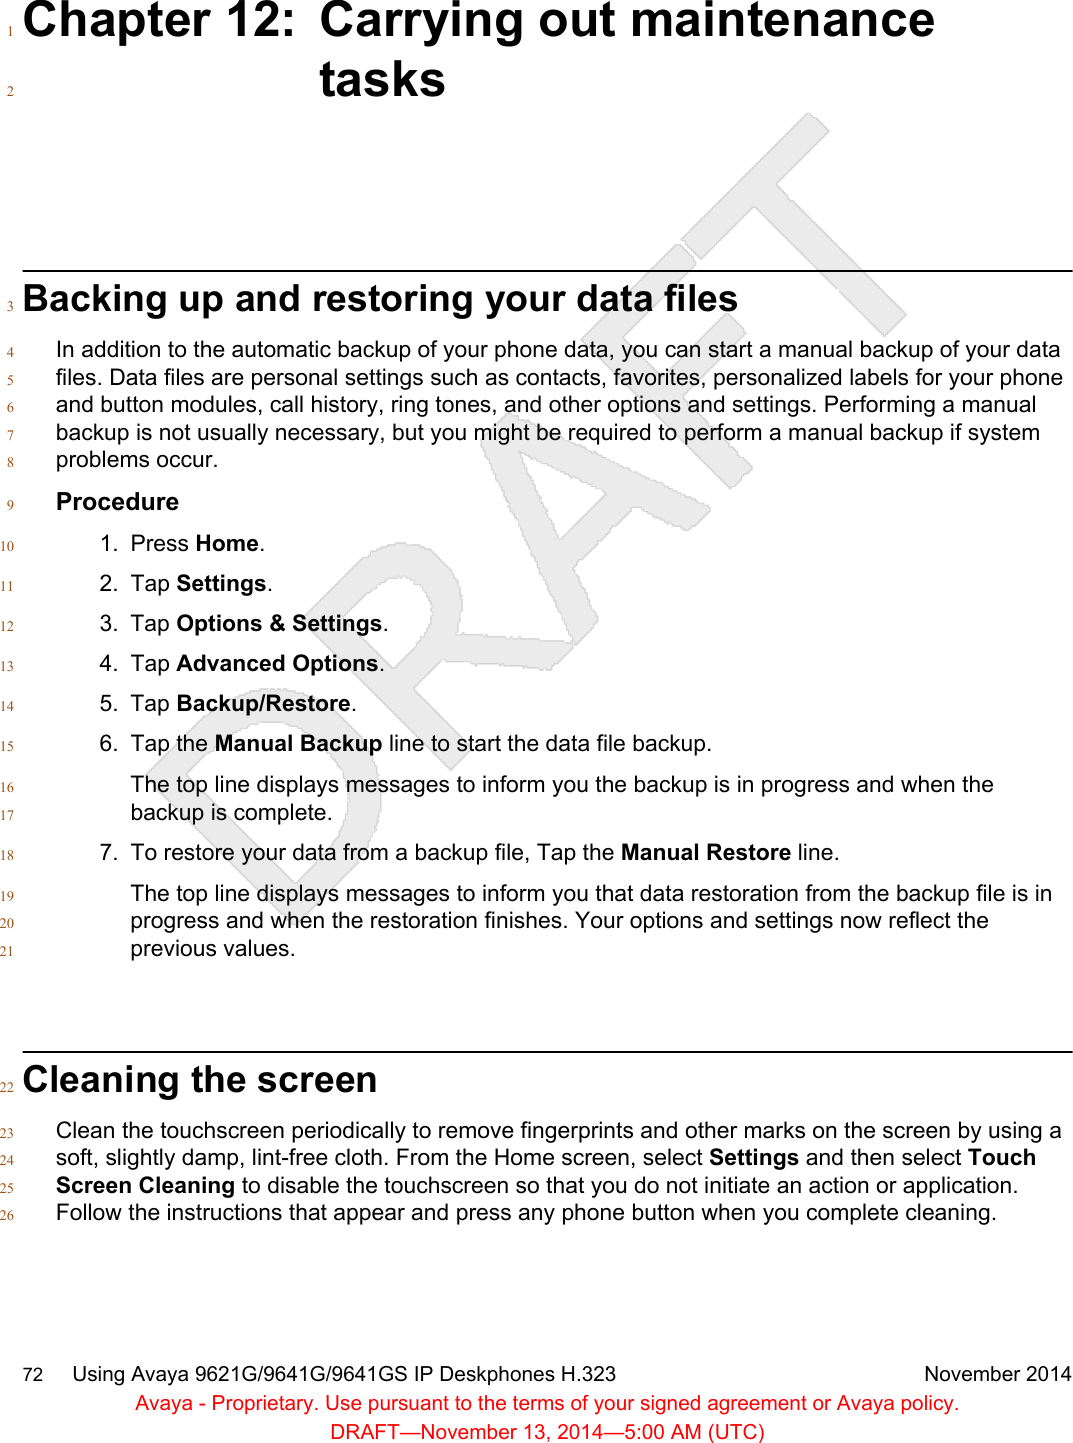 Chapter 12: Carrying out maintenance1tasks2Backing up and restoring your data files3In addition to the automatic backup of your phone data, you can start a manual backup of your data4files. Data files are personal settings such as contacts, favorites, personalized labels for your phone5and button modules, call history, ring tones, and other options and settings. Performing a manual6backup is not usually necessary, but you might be required to perform a manual backup if system7problems occur.8Procedure91. Press Home.102. Tap Settings.113. Tap Options &amp; Settings.124. Tap Advanced Options.135. Tap Backup/Restore.146. Tap the Manual Backup line to start the data file backup.15The top line displays messages to inform you the backup is in progress and when the16backup is complete.177. To restore your data from a backup file, Tap the Manual Restore line.18The top line displays messages to inform you that data restoration from the backup file is in19progress and when the restoration finishes. Your options and settings now reflect the20previous values.21Cleaning the screen22Clean the touchscreen periodically to remove fingerprints and other marks on the screen by using a23soft, slightly damp, lint-free cloth. From the Home screen, select Settings and then select Touch24Screen Cleaning to disable the touchscreen so that you do not initiate an action or application.25Follow the instructions that appear and press any phone button when you complete cleaning.2672     Using Avaya 9621G/9641G/9641GS IP Deskphones H.323 November 2014Avaya - Proprietary. Use pursuant to the terms of your signed agreement or Avaya policy.DRAFT—November 13, 2014—5:00 AM (UTC)